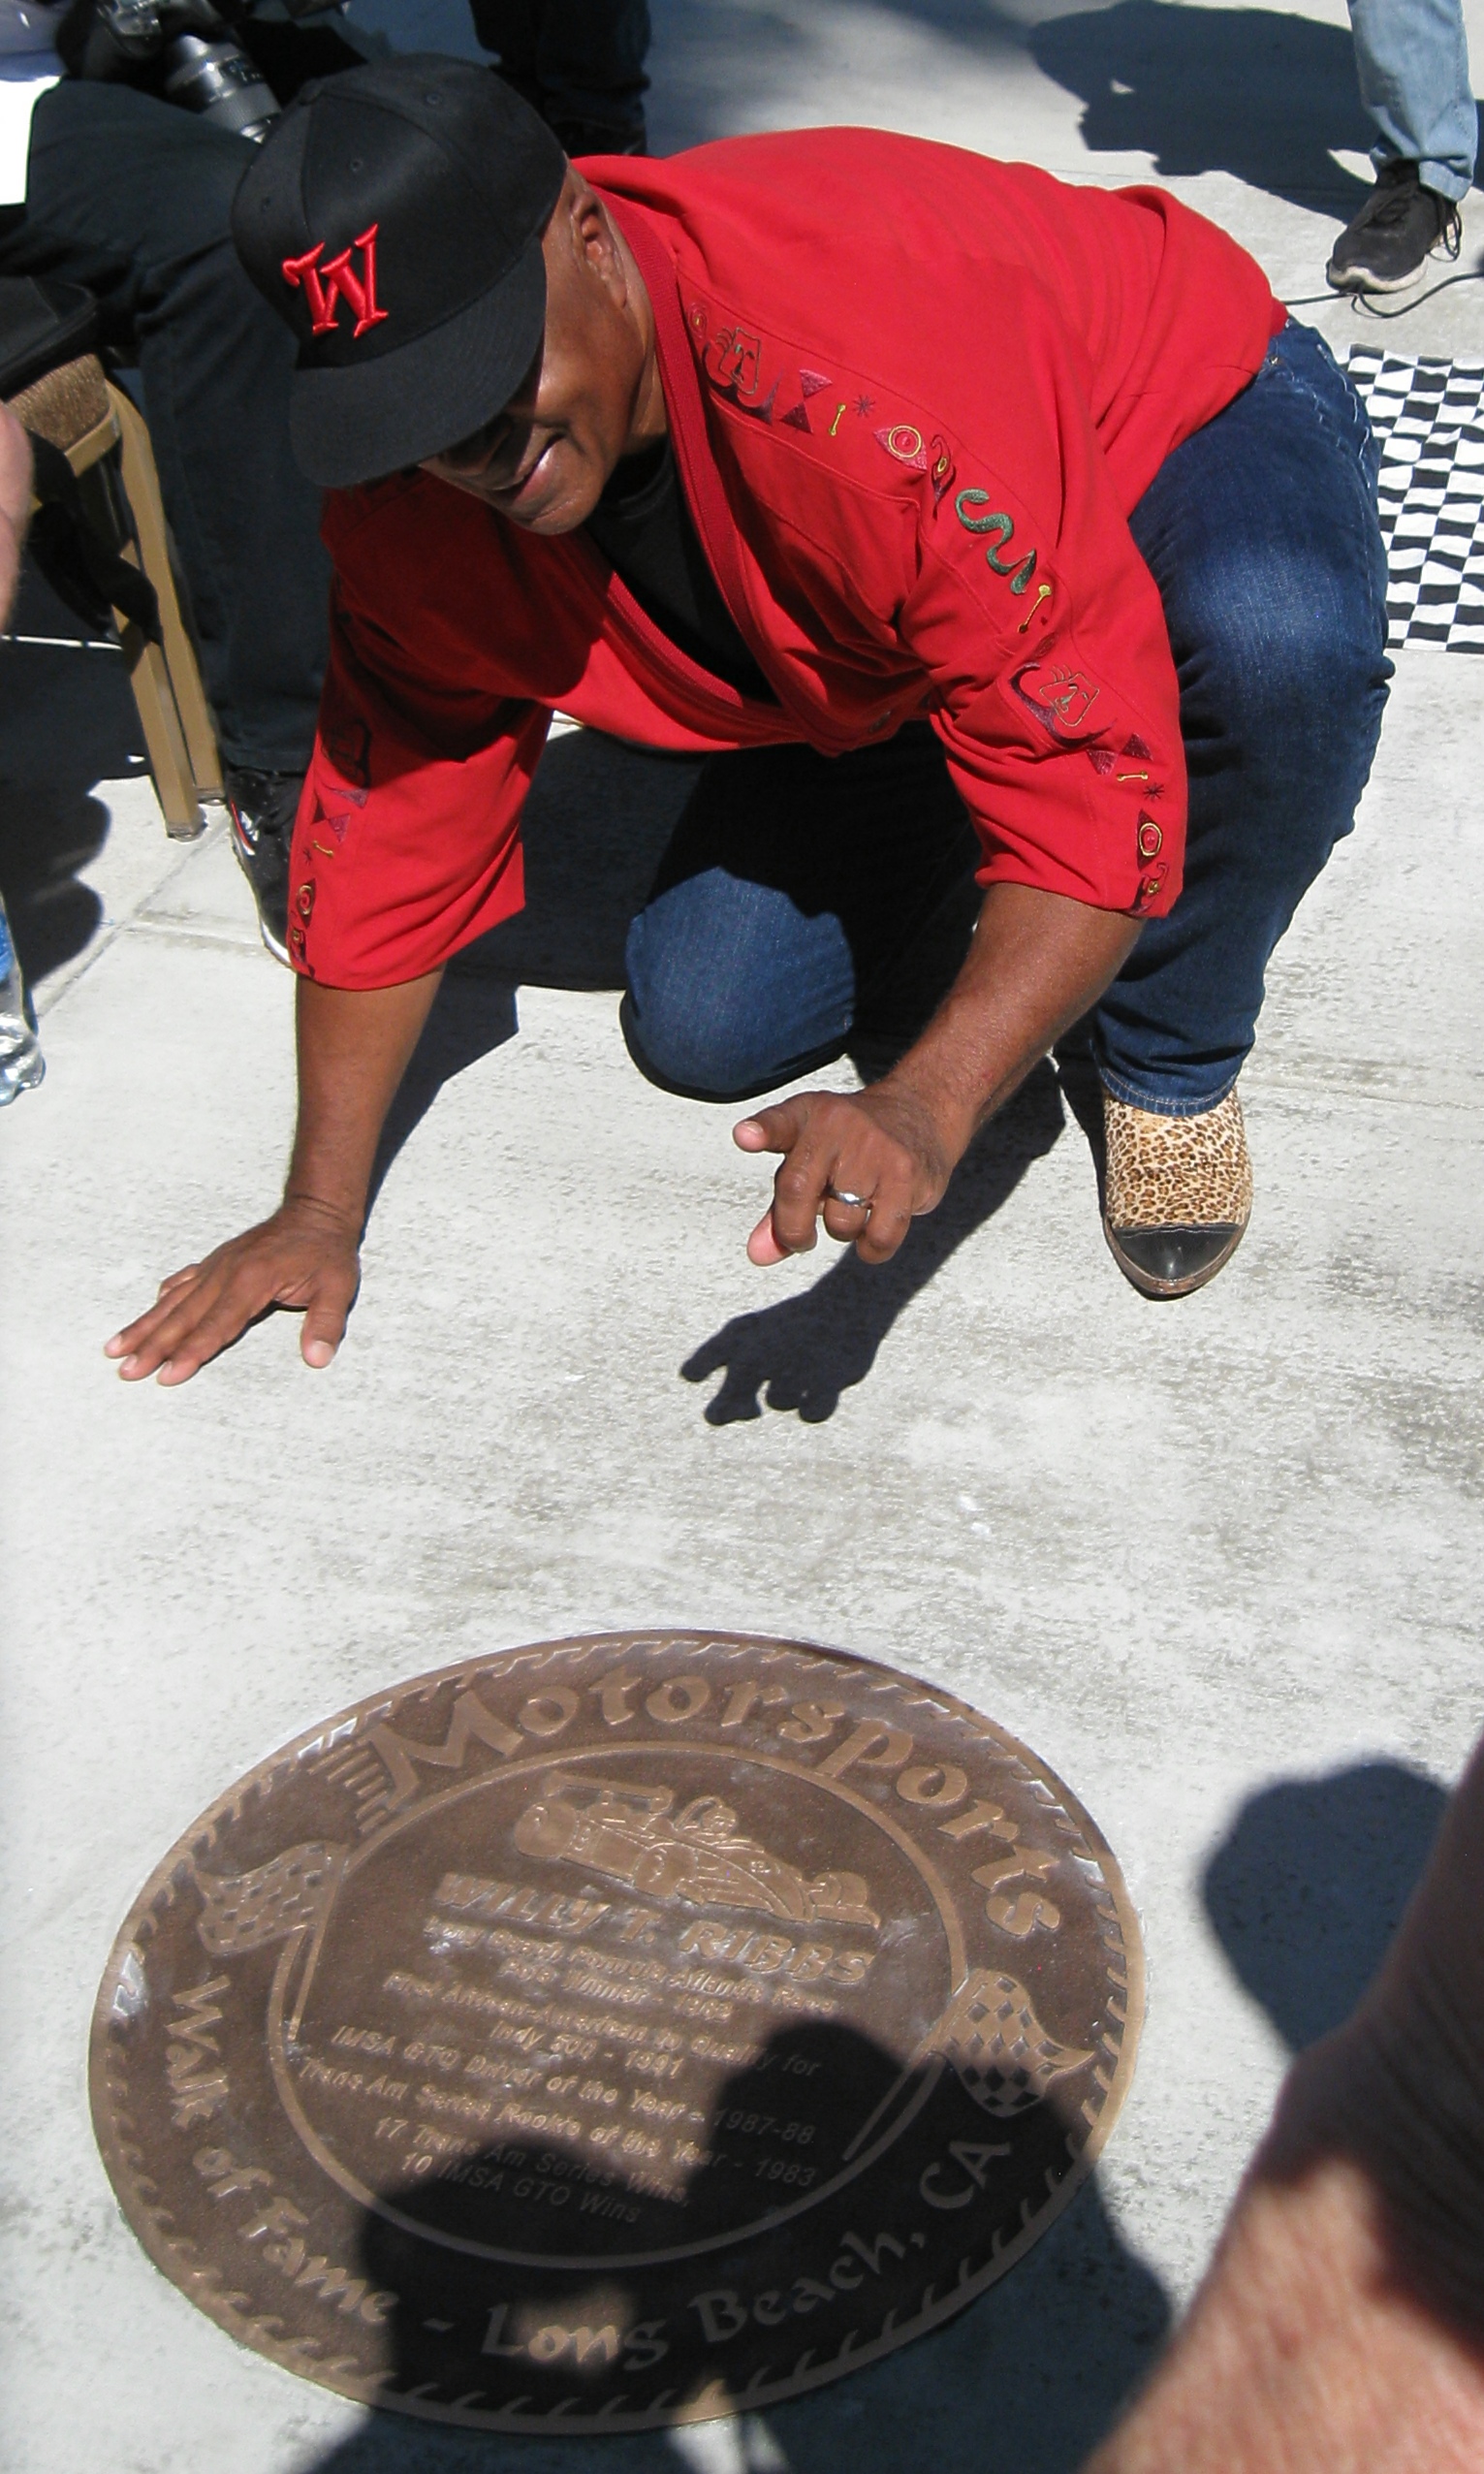 Willy T holds up a number one sign right before he kisses the plaque as if he were kissing the bricks at the Indianapolis Motor Speedway.